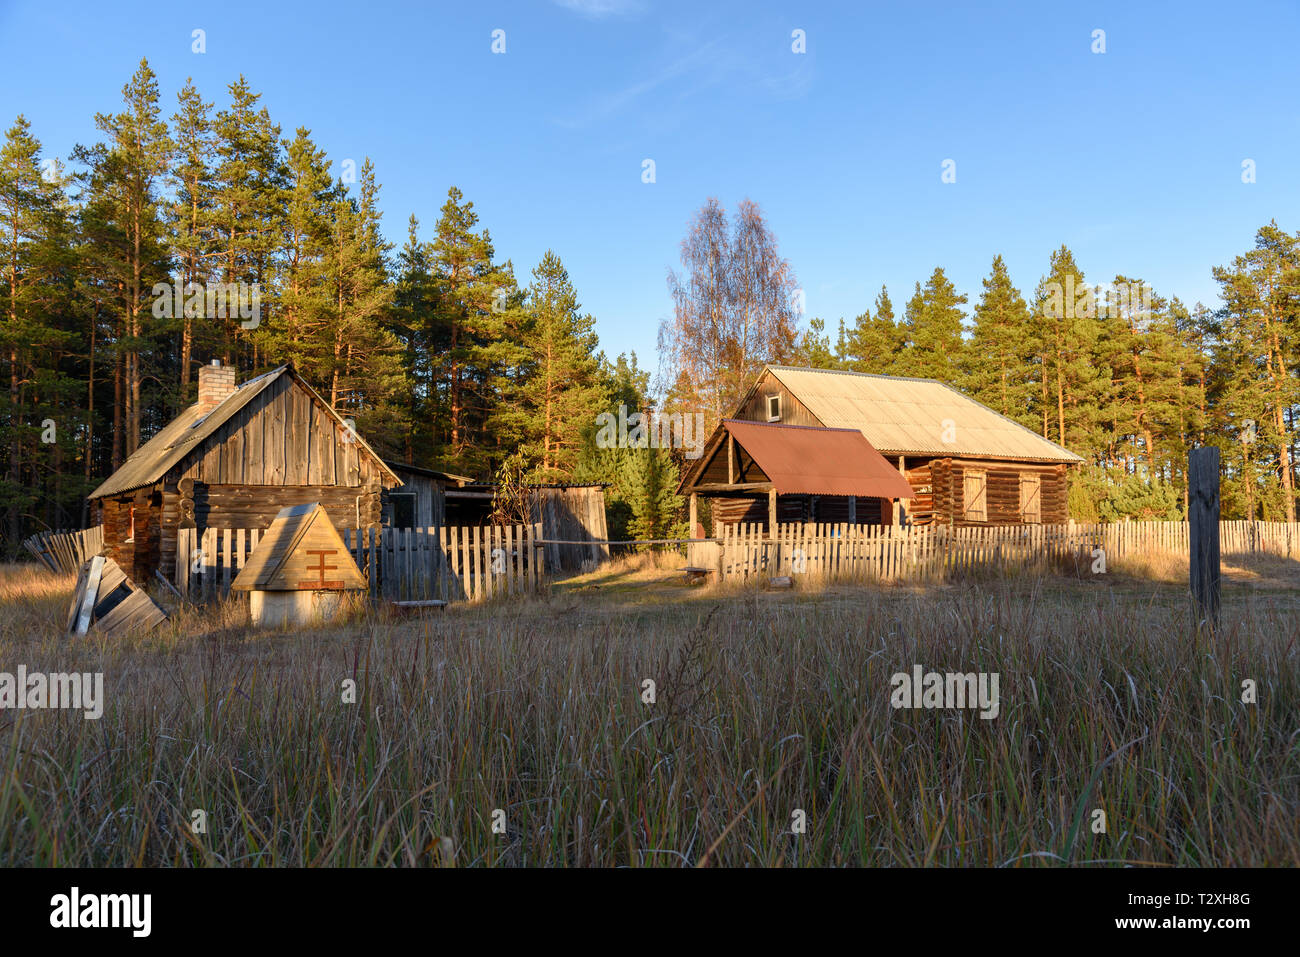 Country wooden house on a clearing in the forest Stock Photo